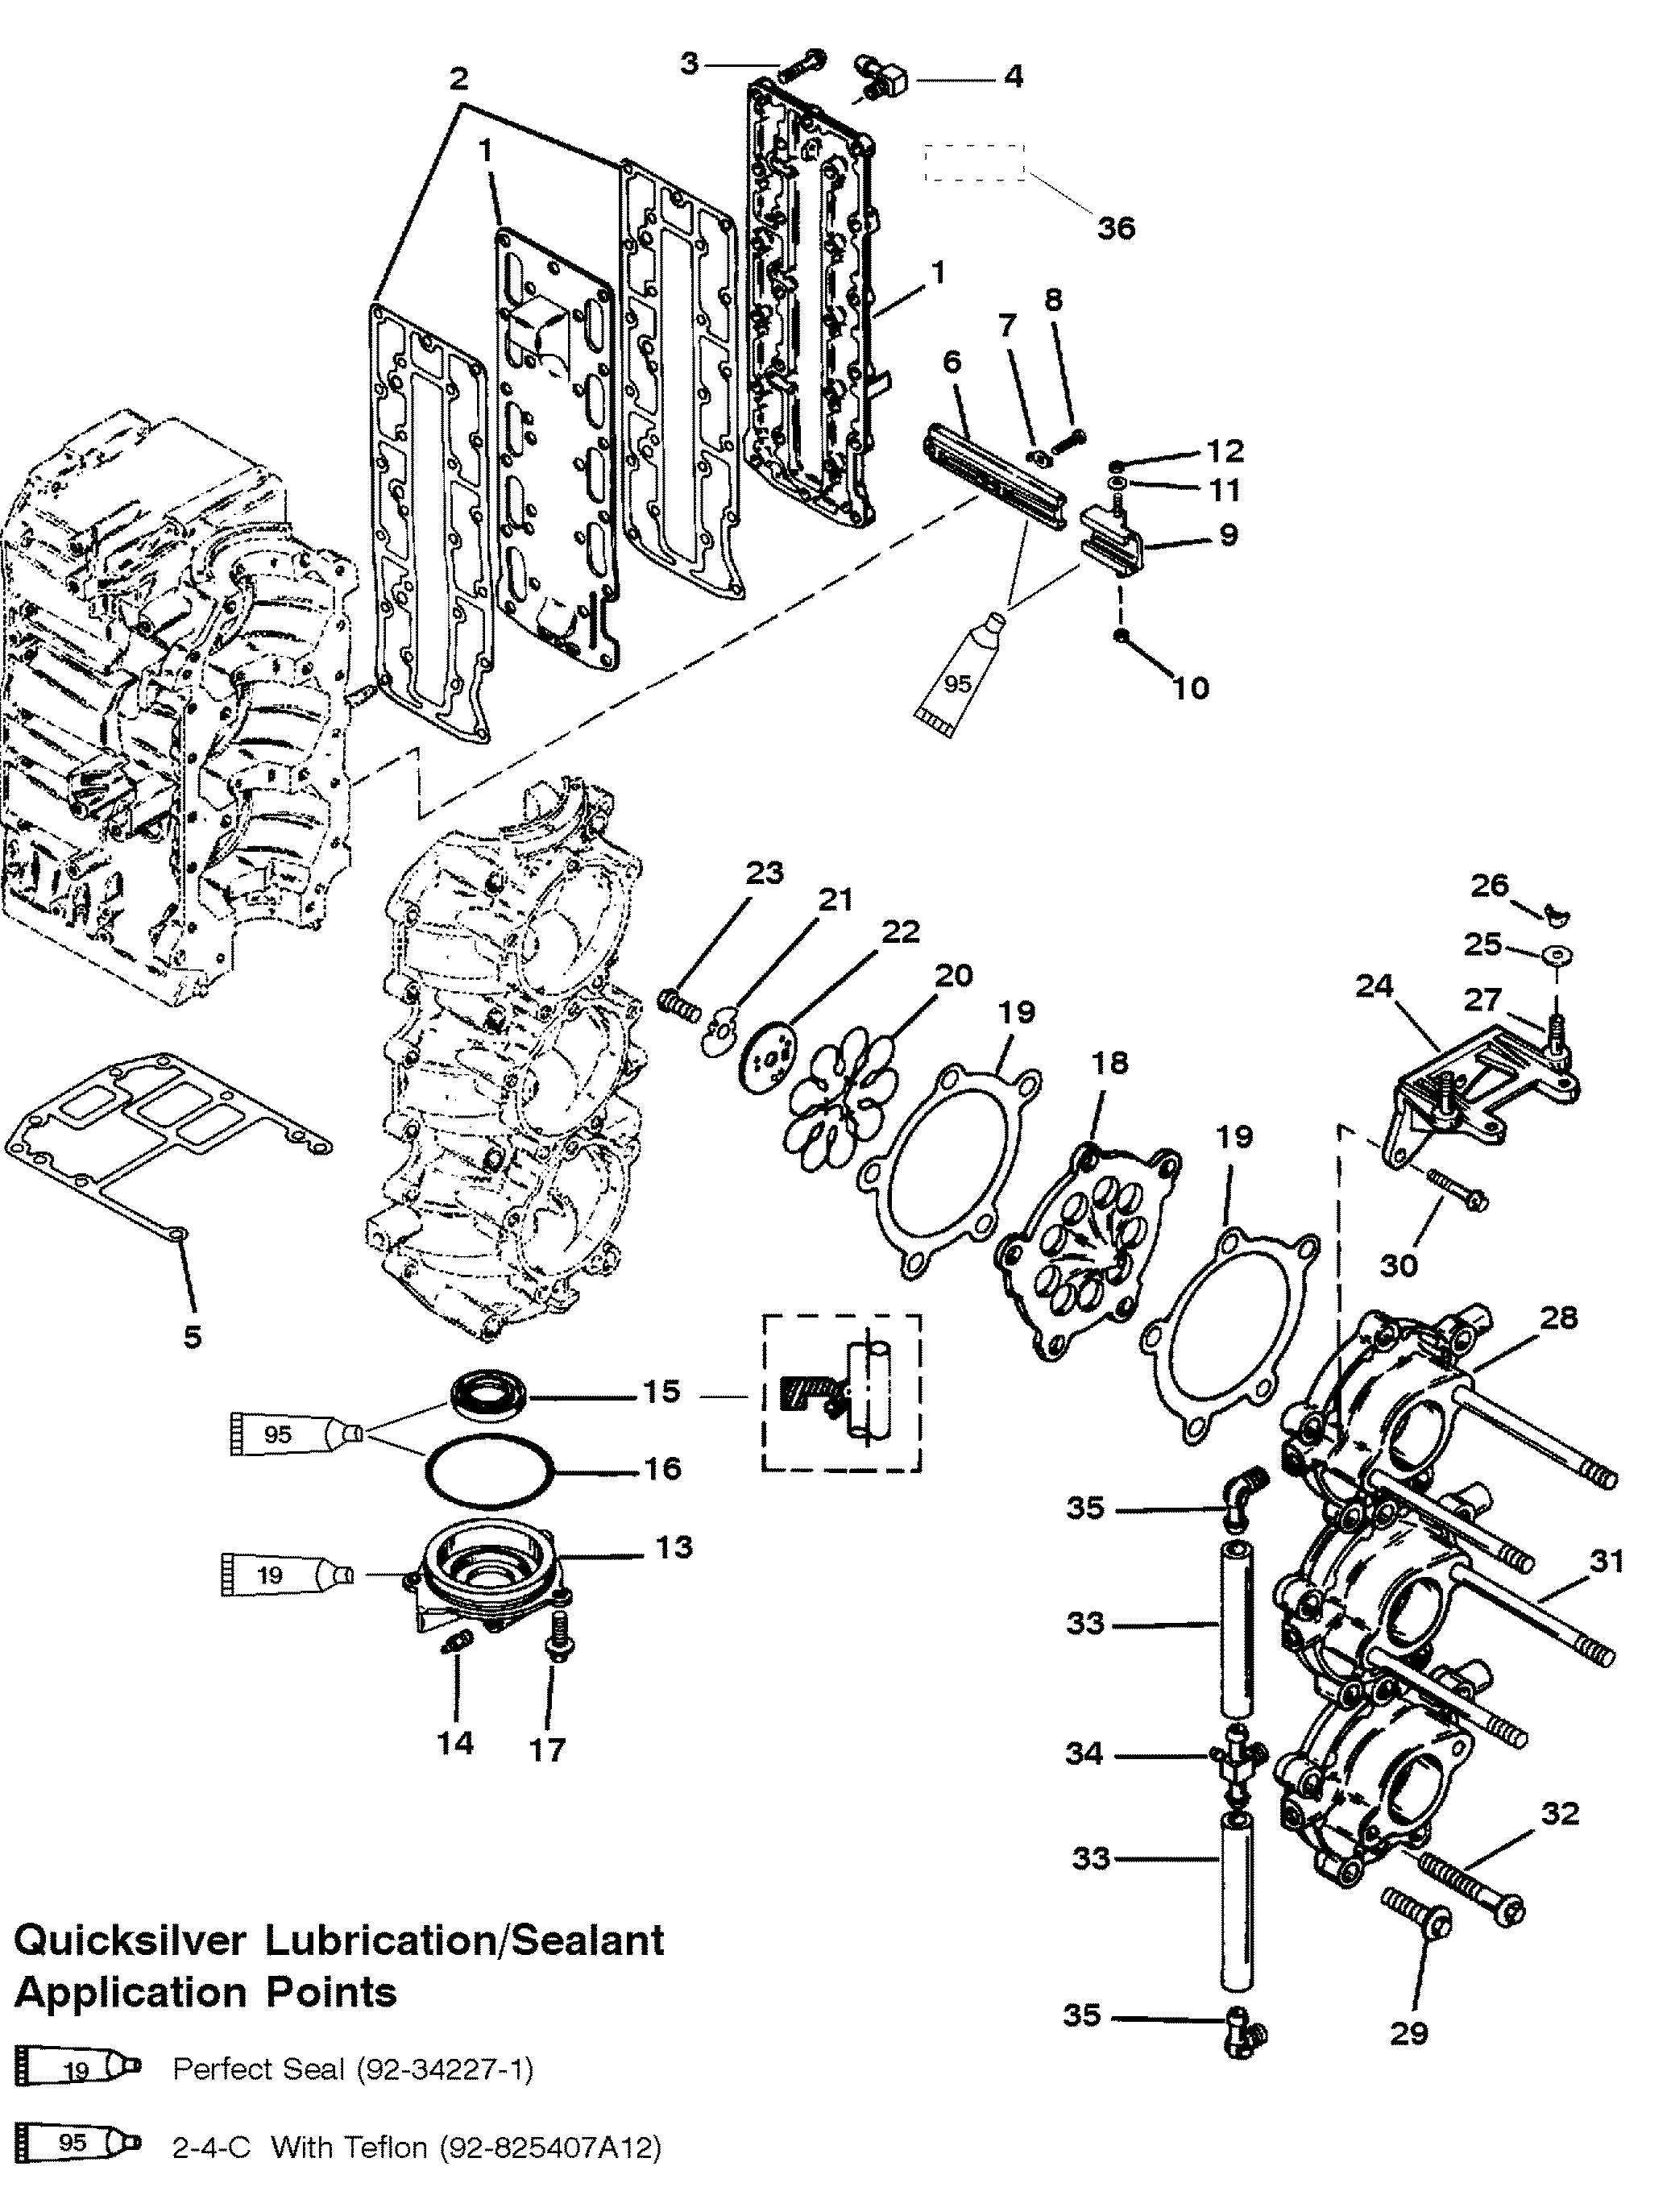 INDUCTION MANIFOLD AND REED BLOCK